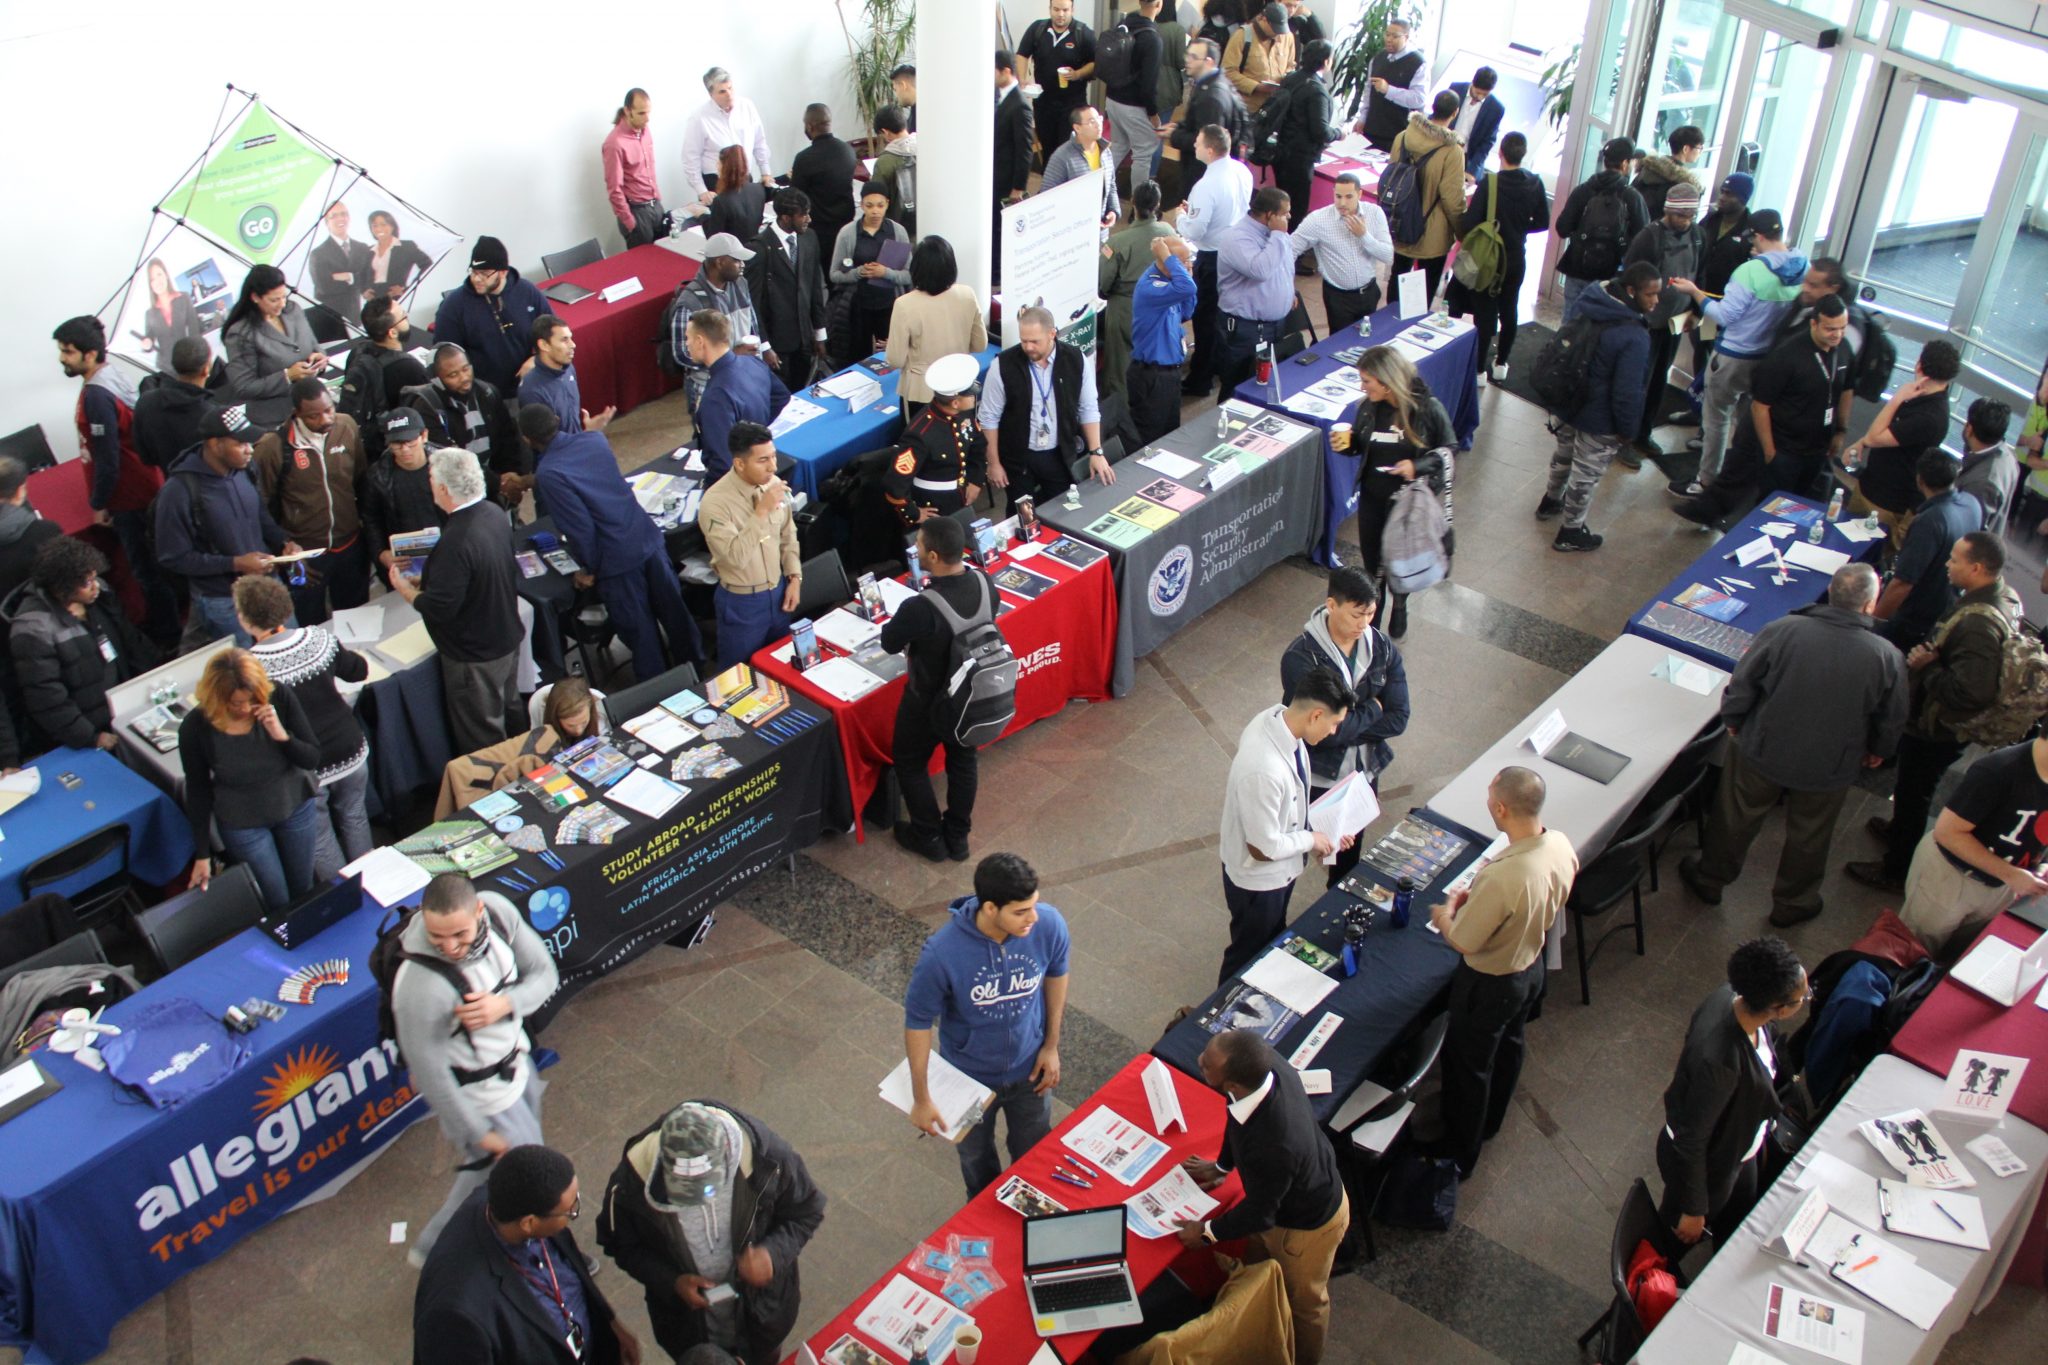 Fall Internship Fair Provides New Opportunities to Students